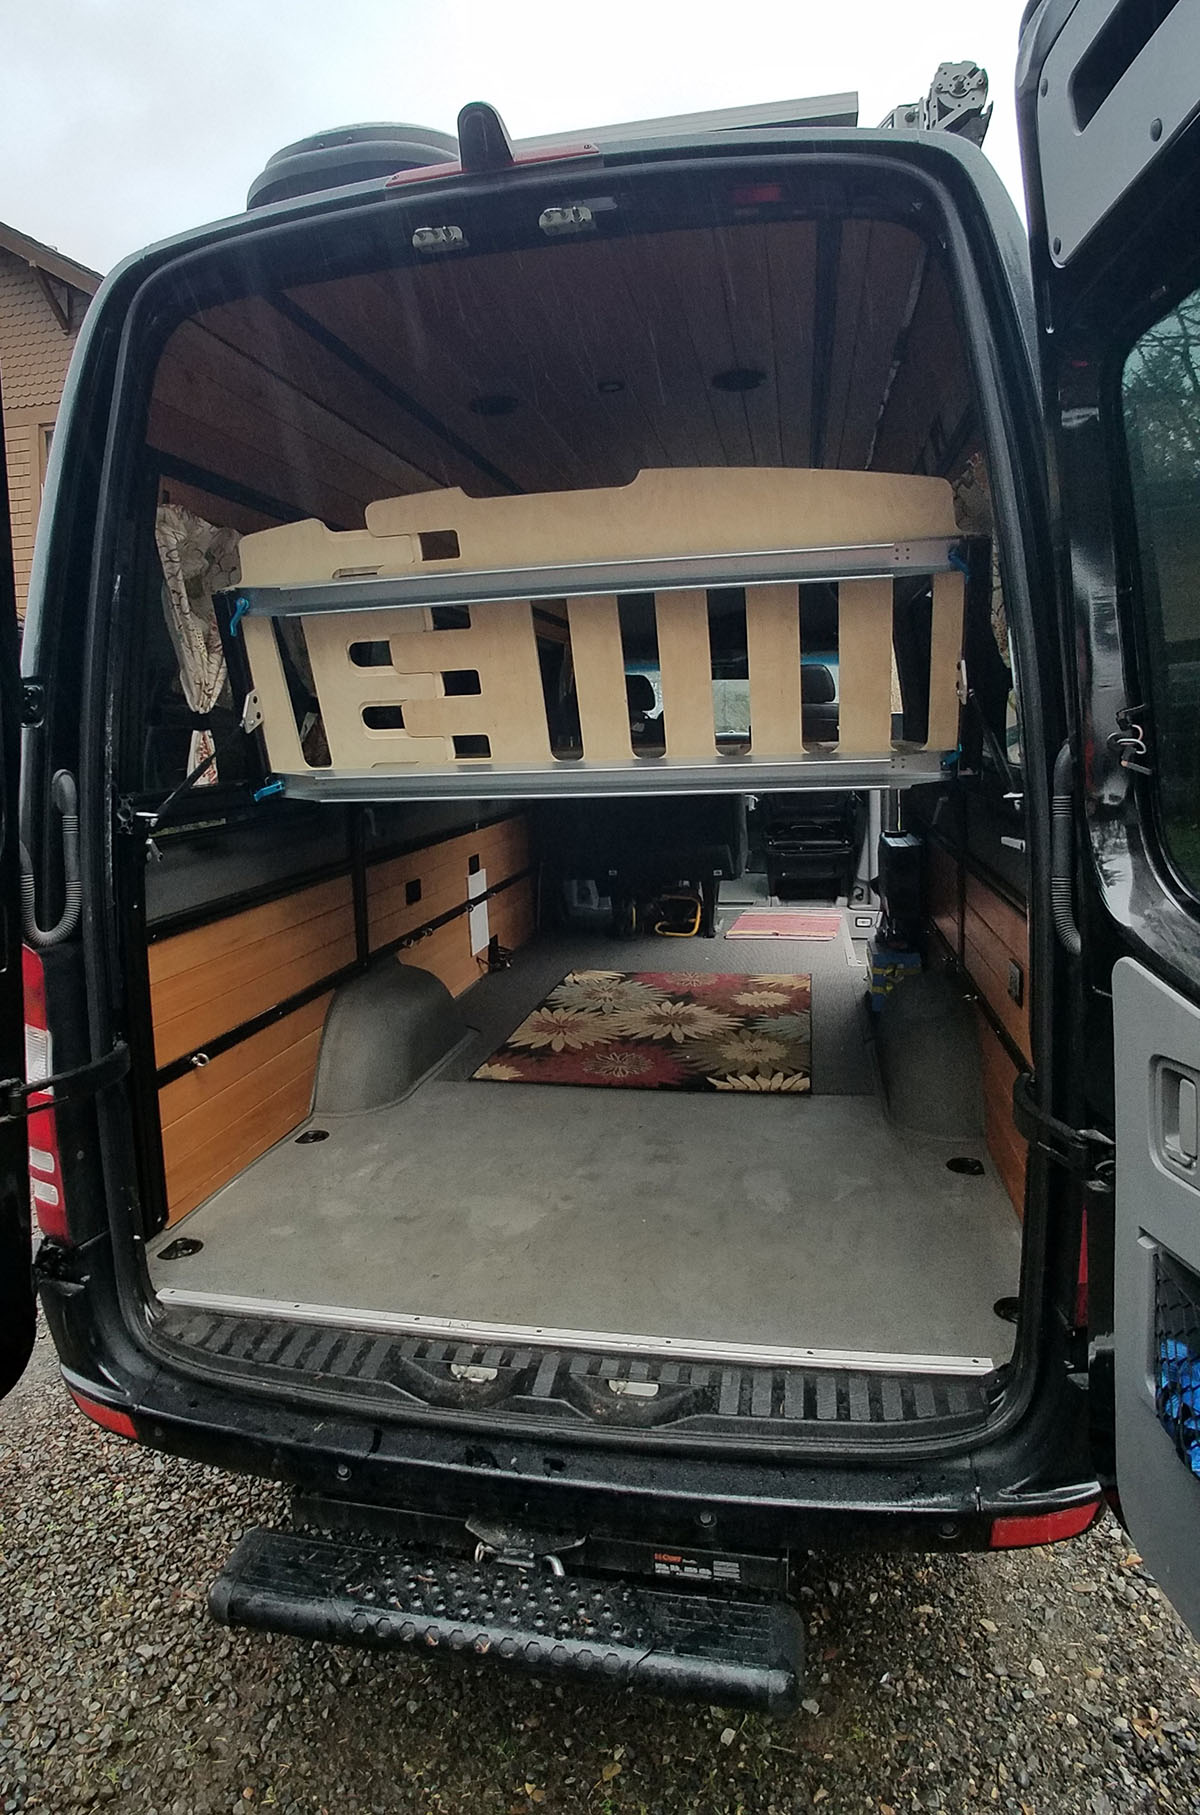 Adjustable bed, tilts to create easier access in the back of our converted Sprinter van